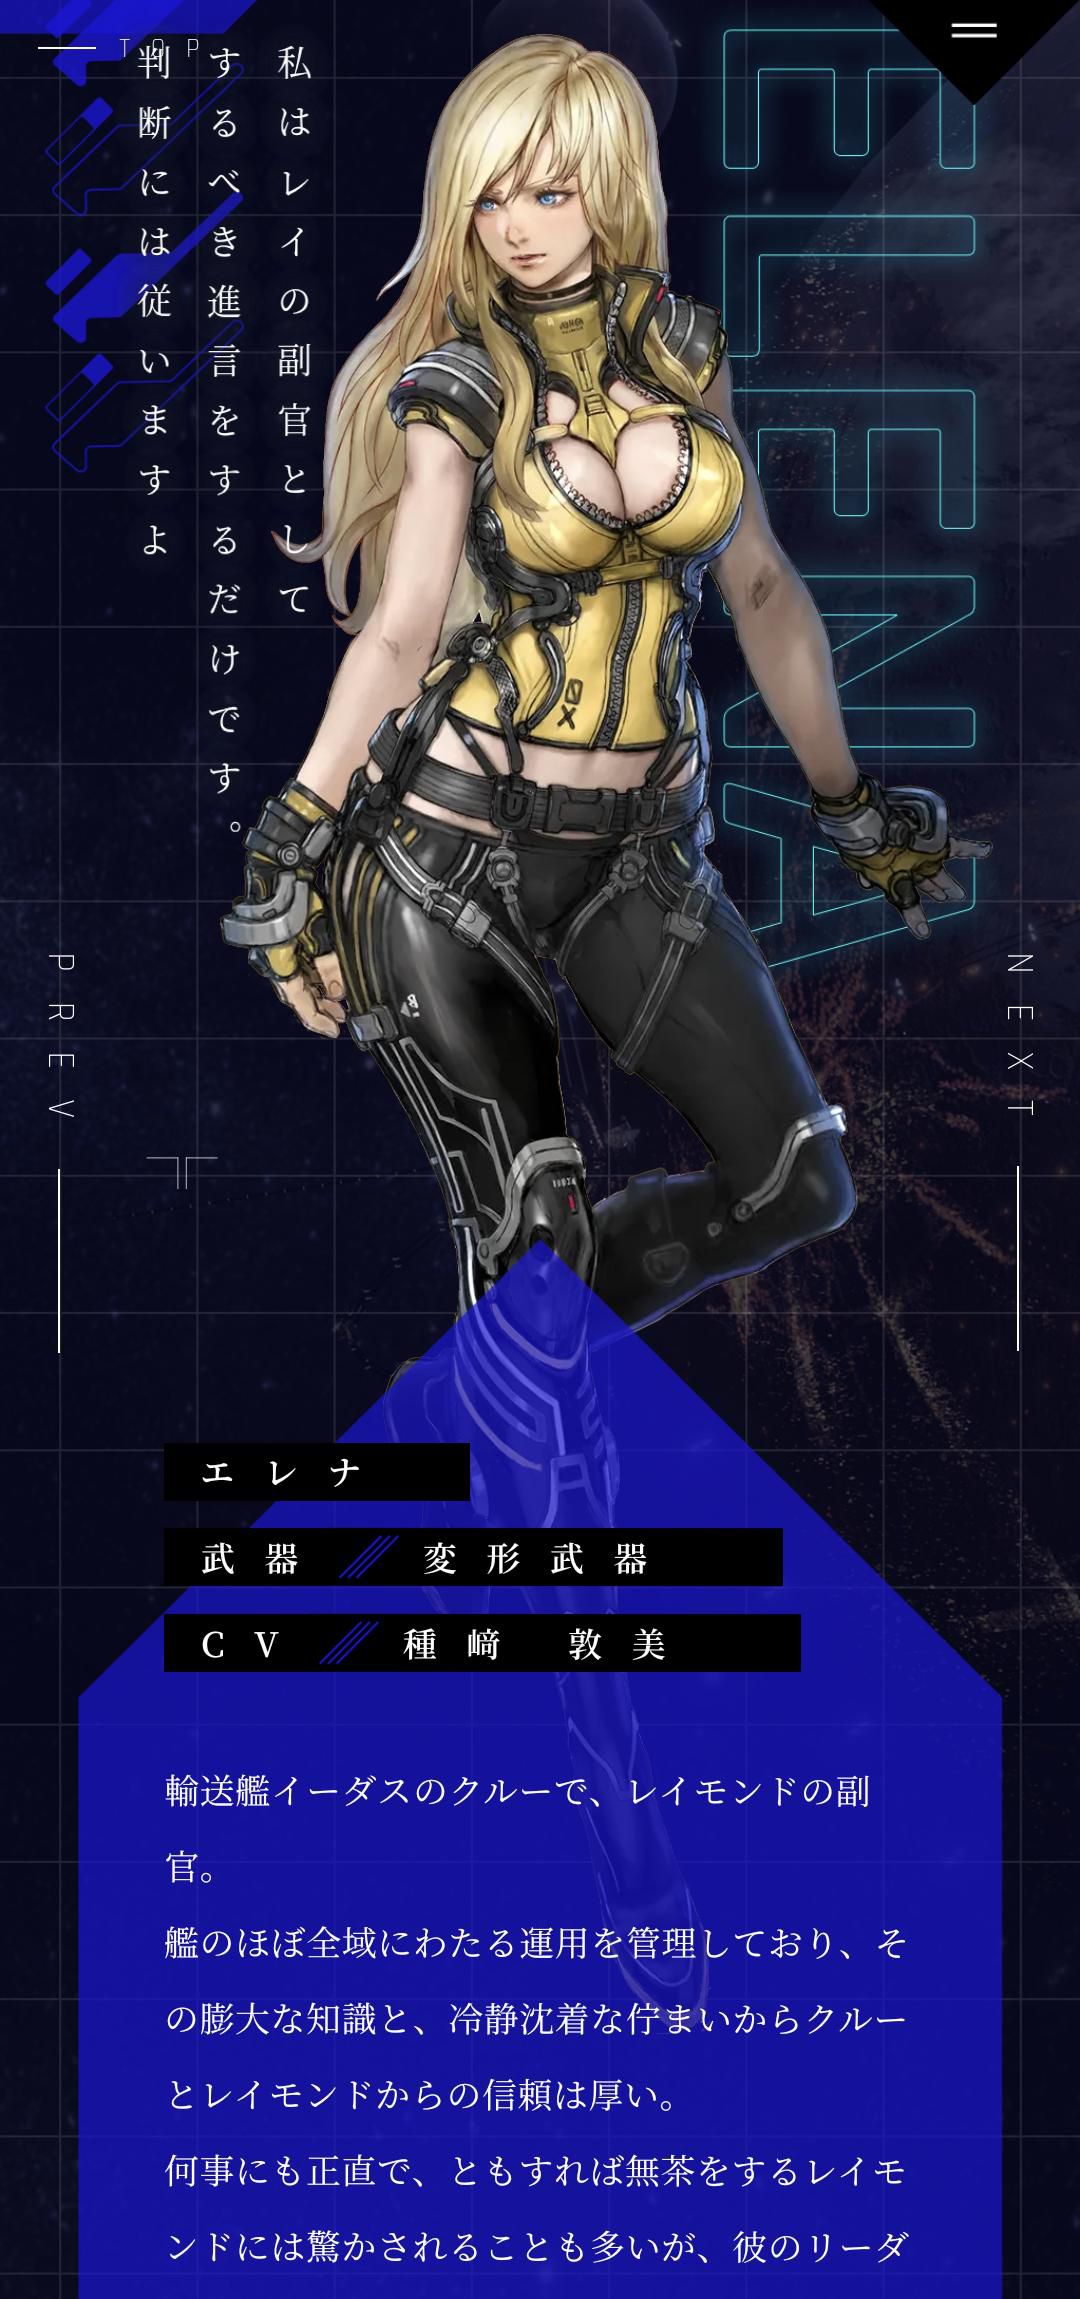 【Image】Star Ocean's new new character, insanely etch 2